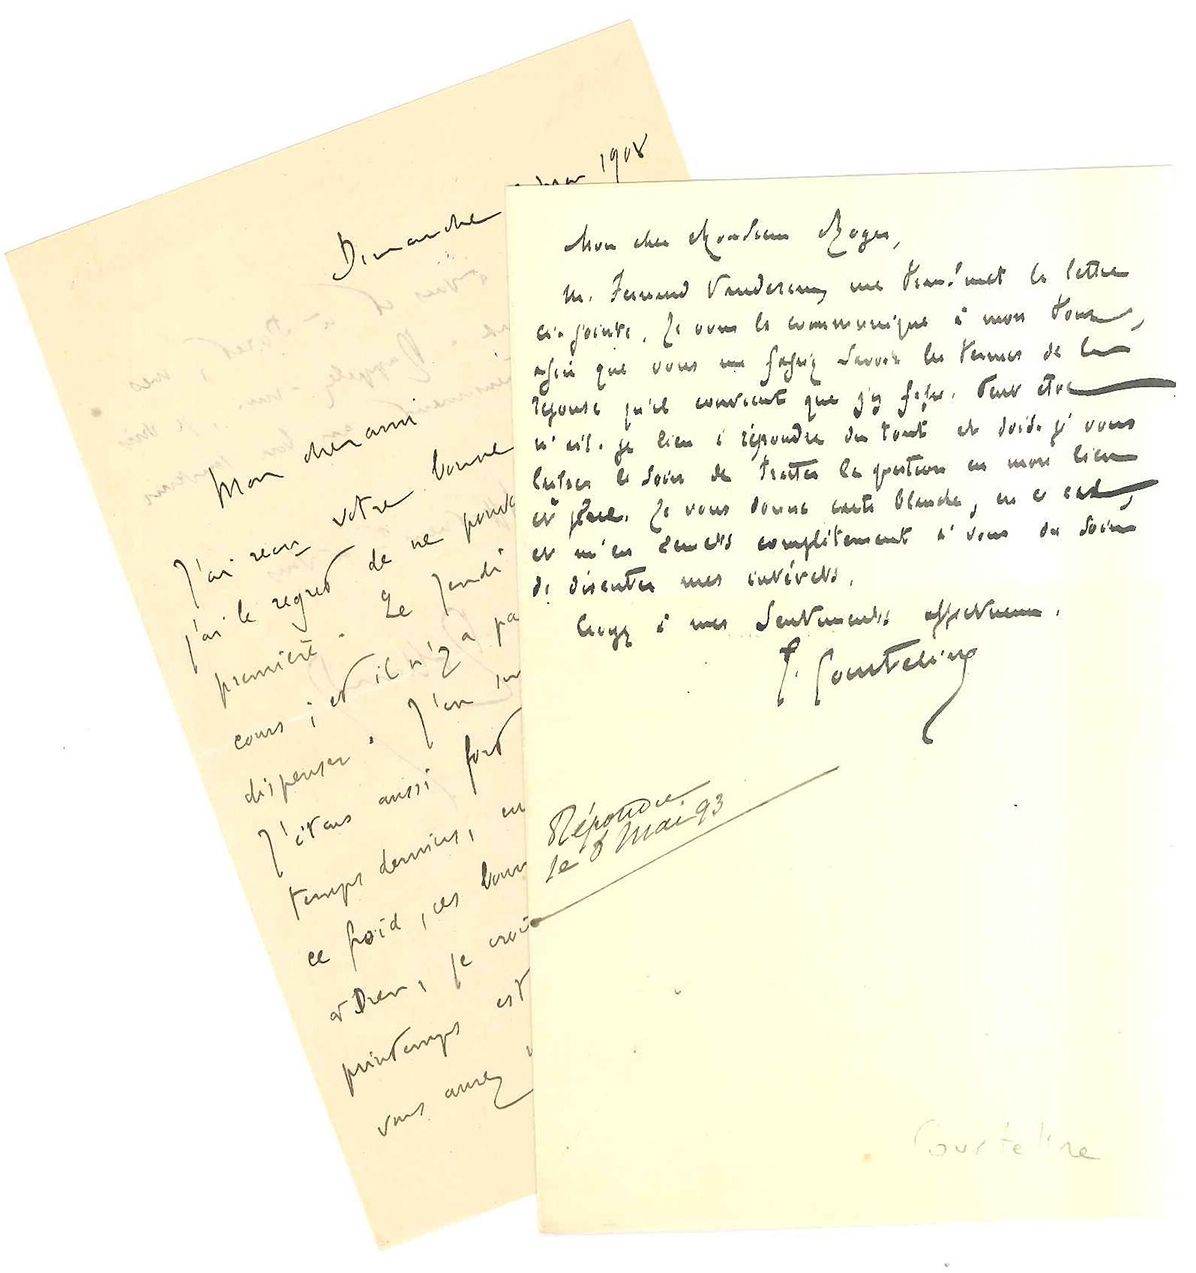 DIVERS Set of 6 autograph letters signed by various authors.
- Romain ROLLAND. A&hellip;